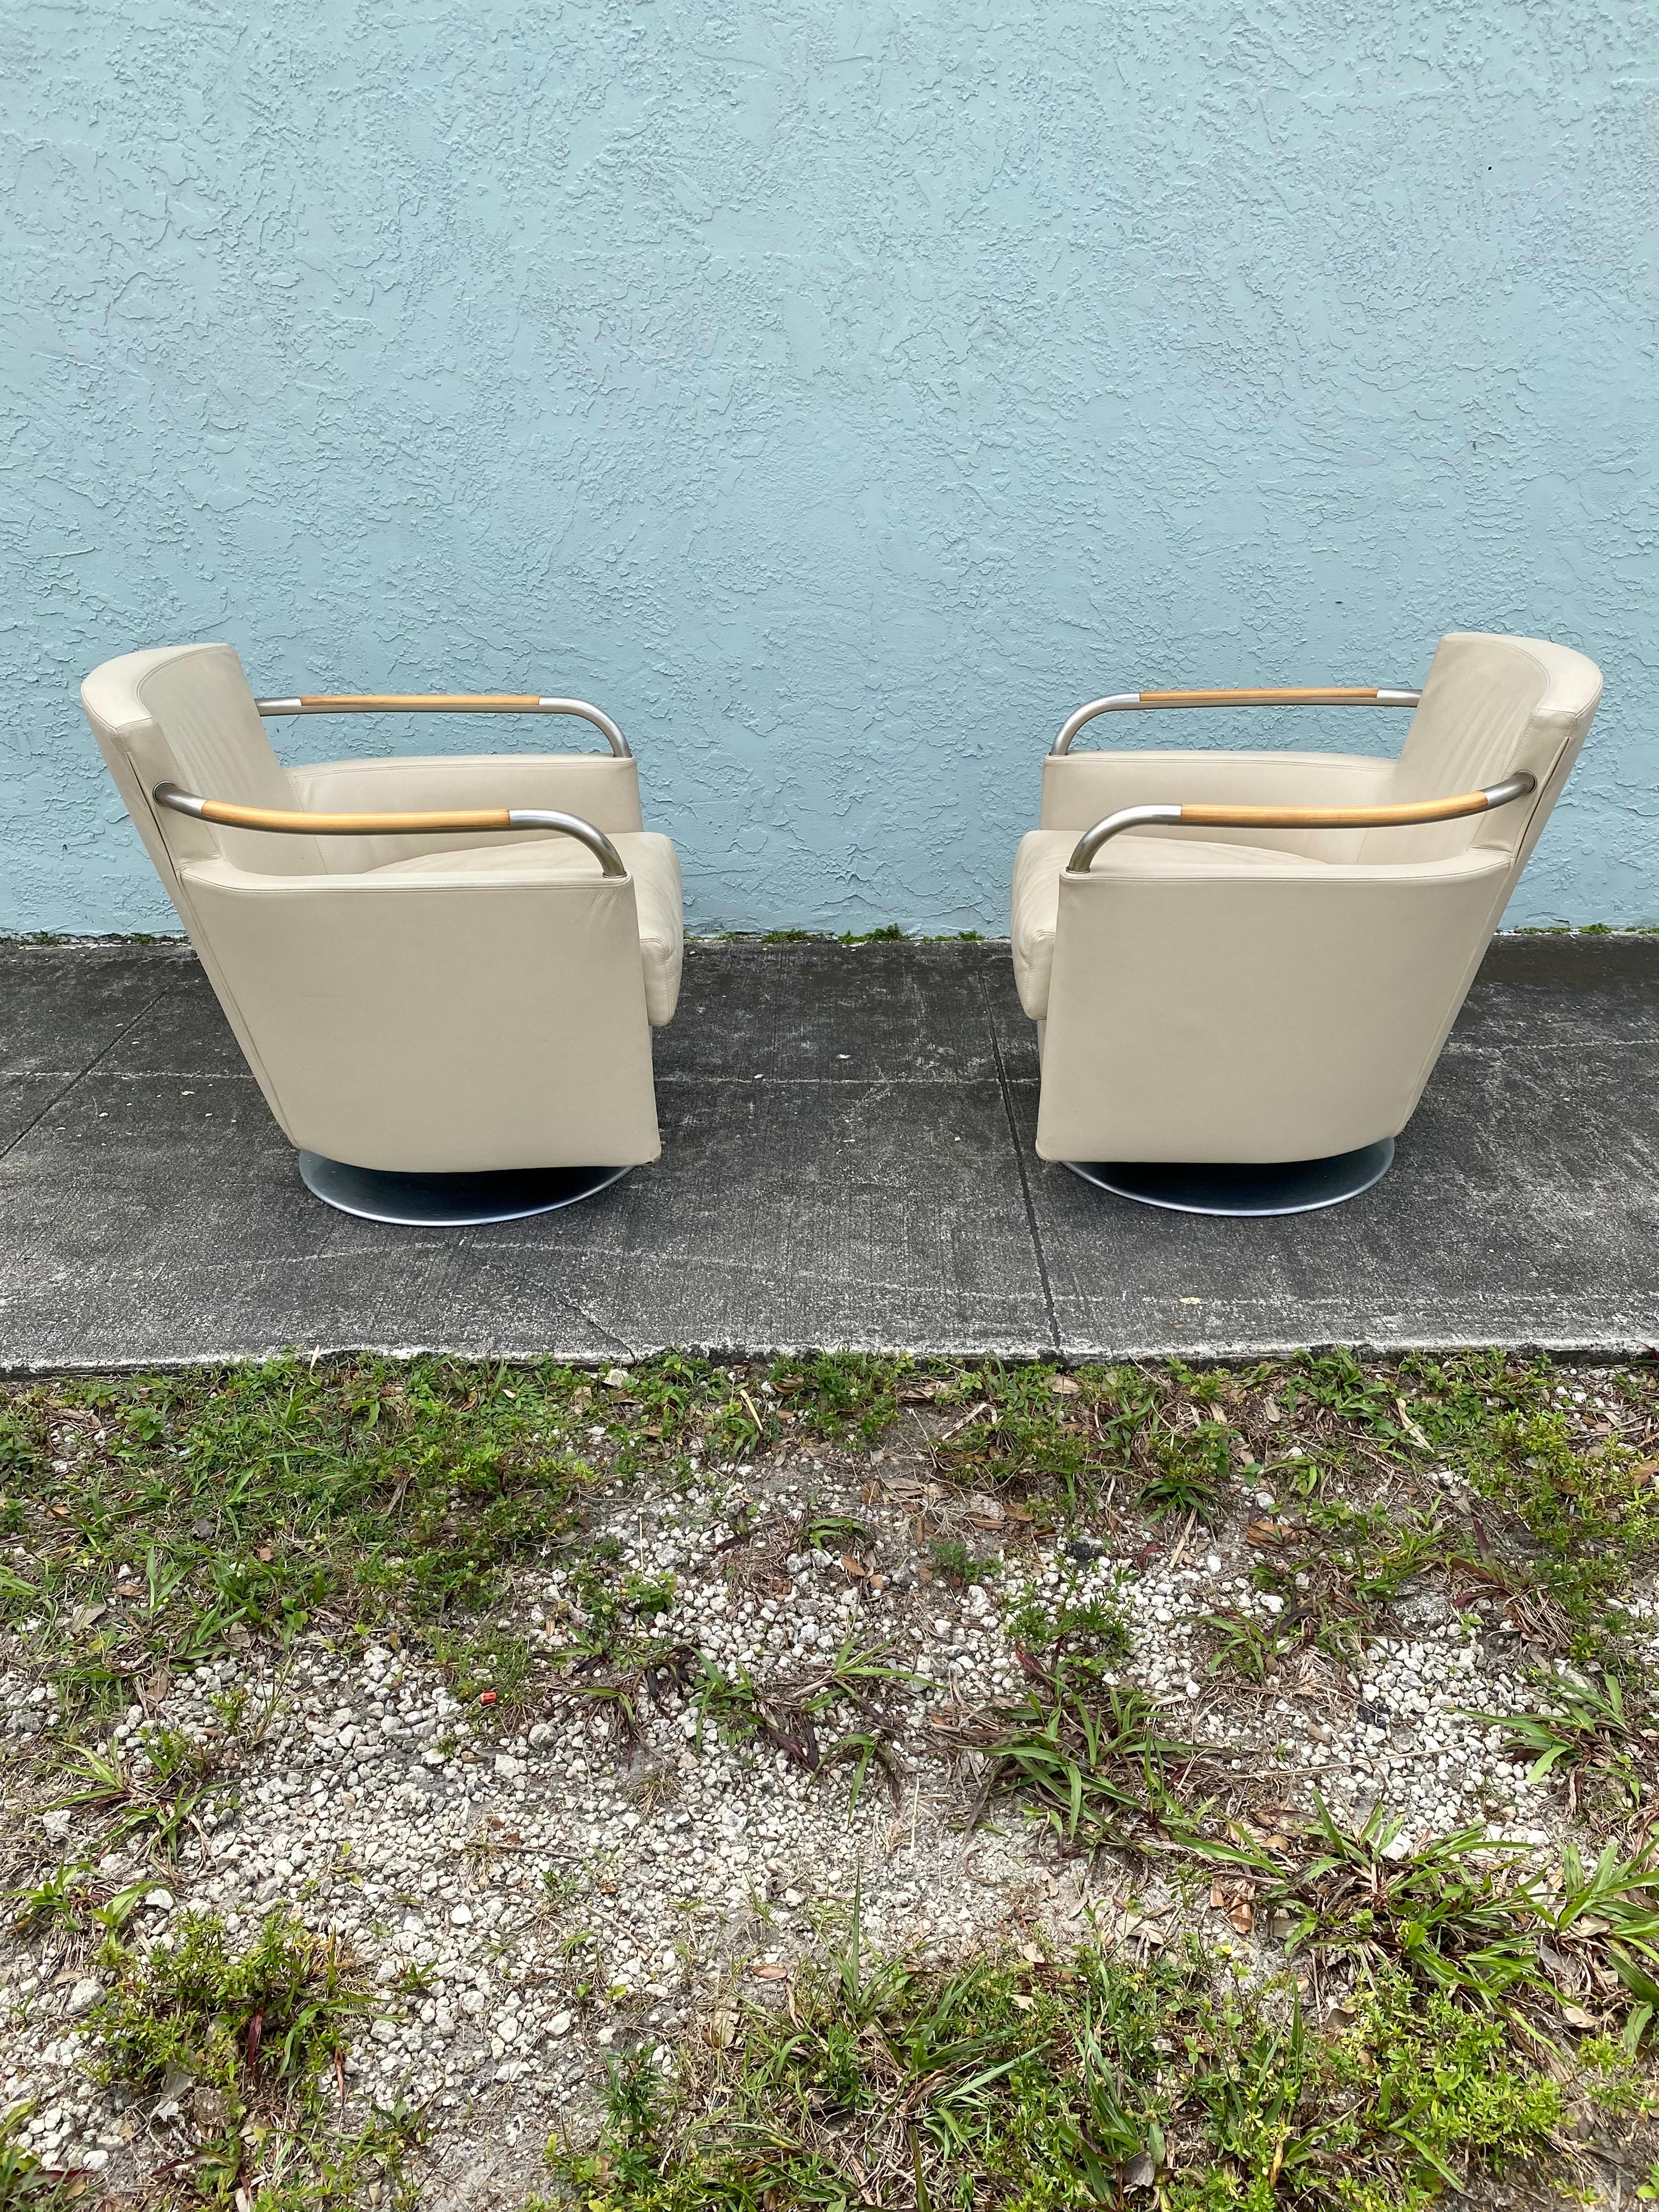 1980s Barrel Steel Wood Leather Giorgetti Swivel Chairs, Set of 2 In Good Condition For Sale In Fort Lauderdale, FL